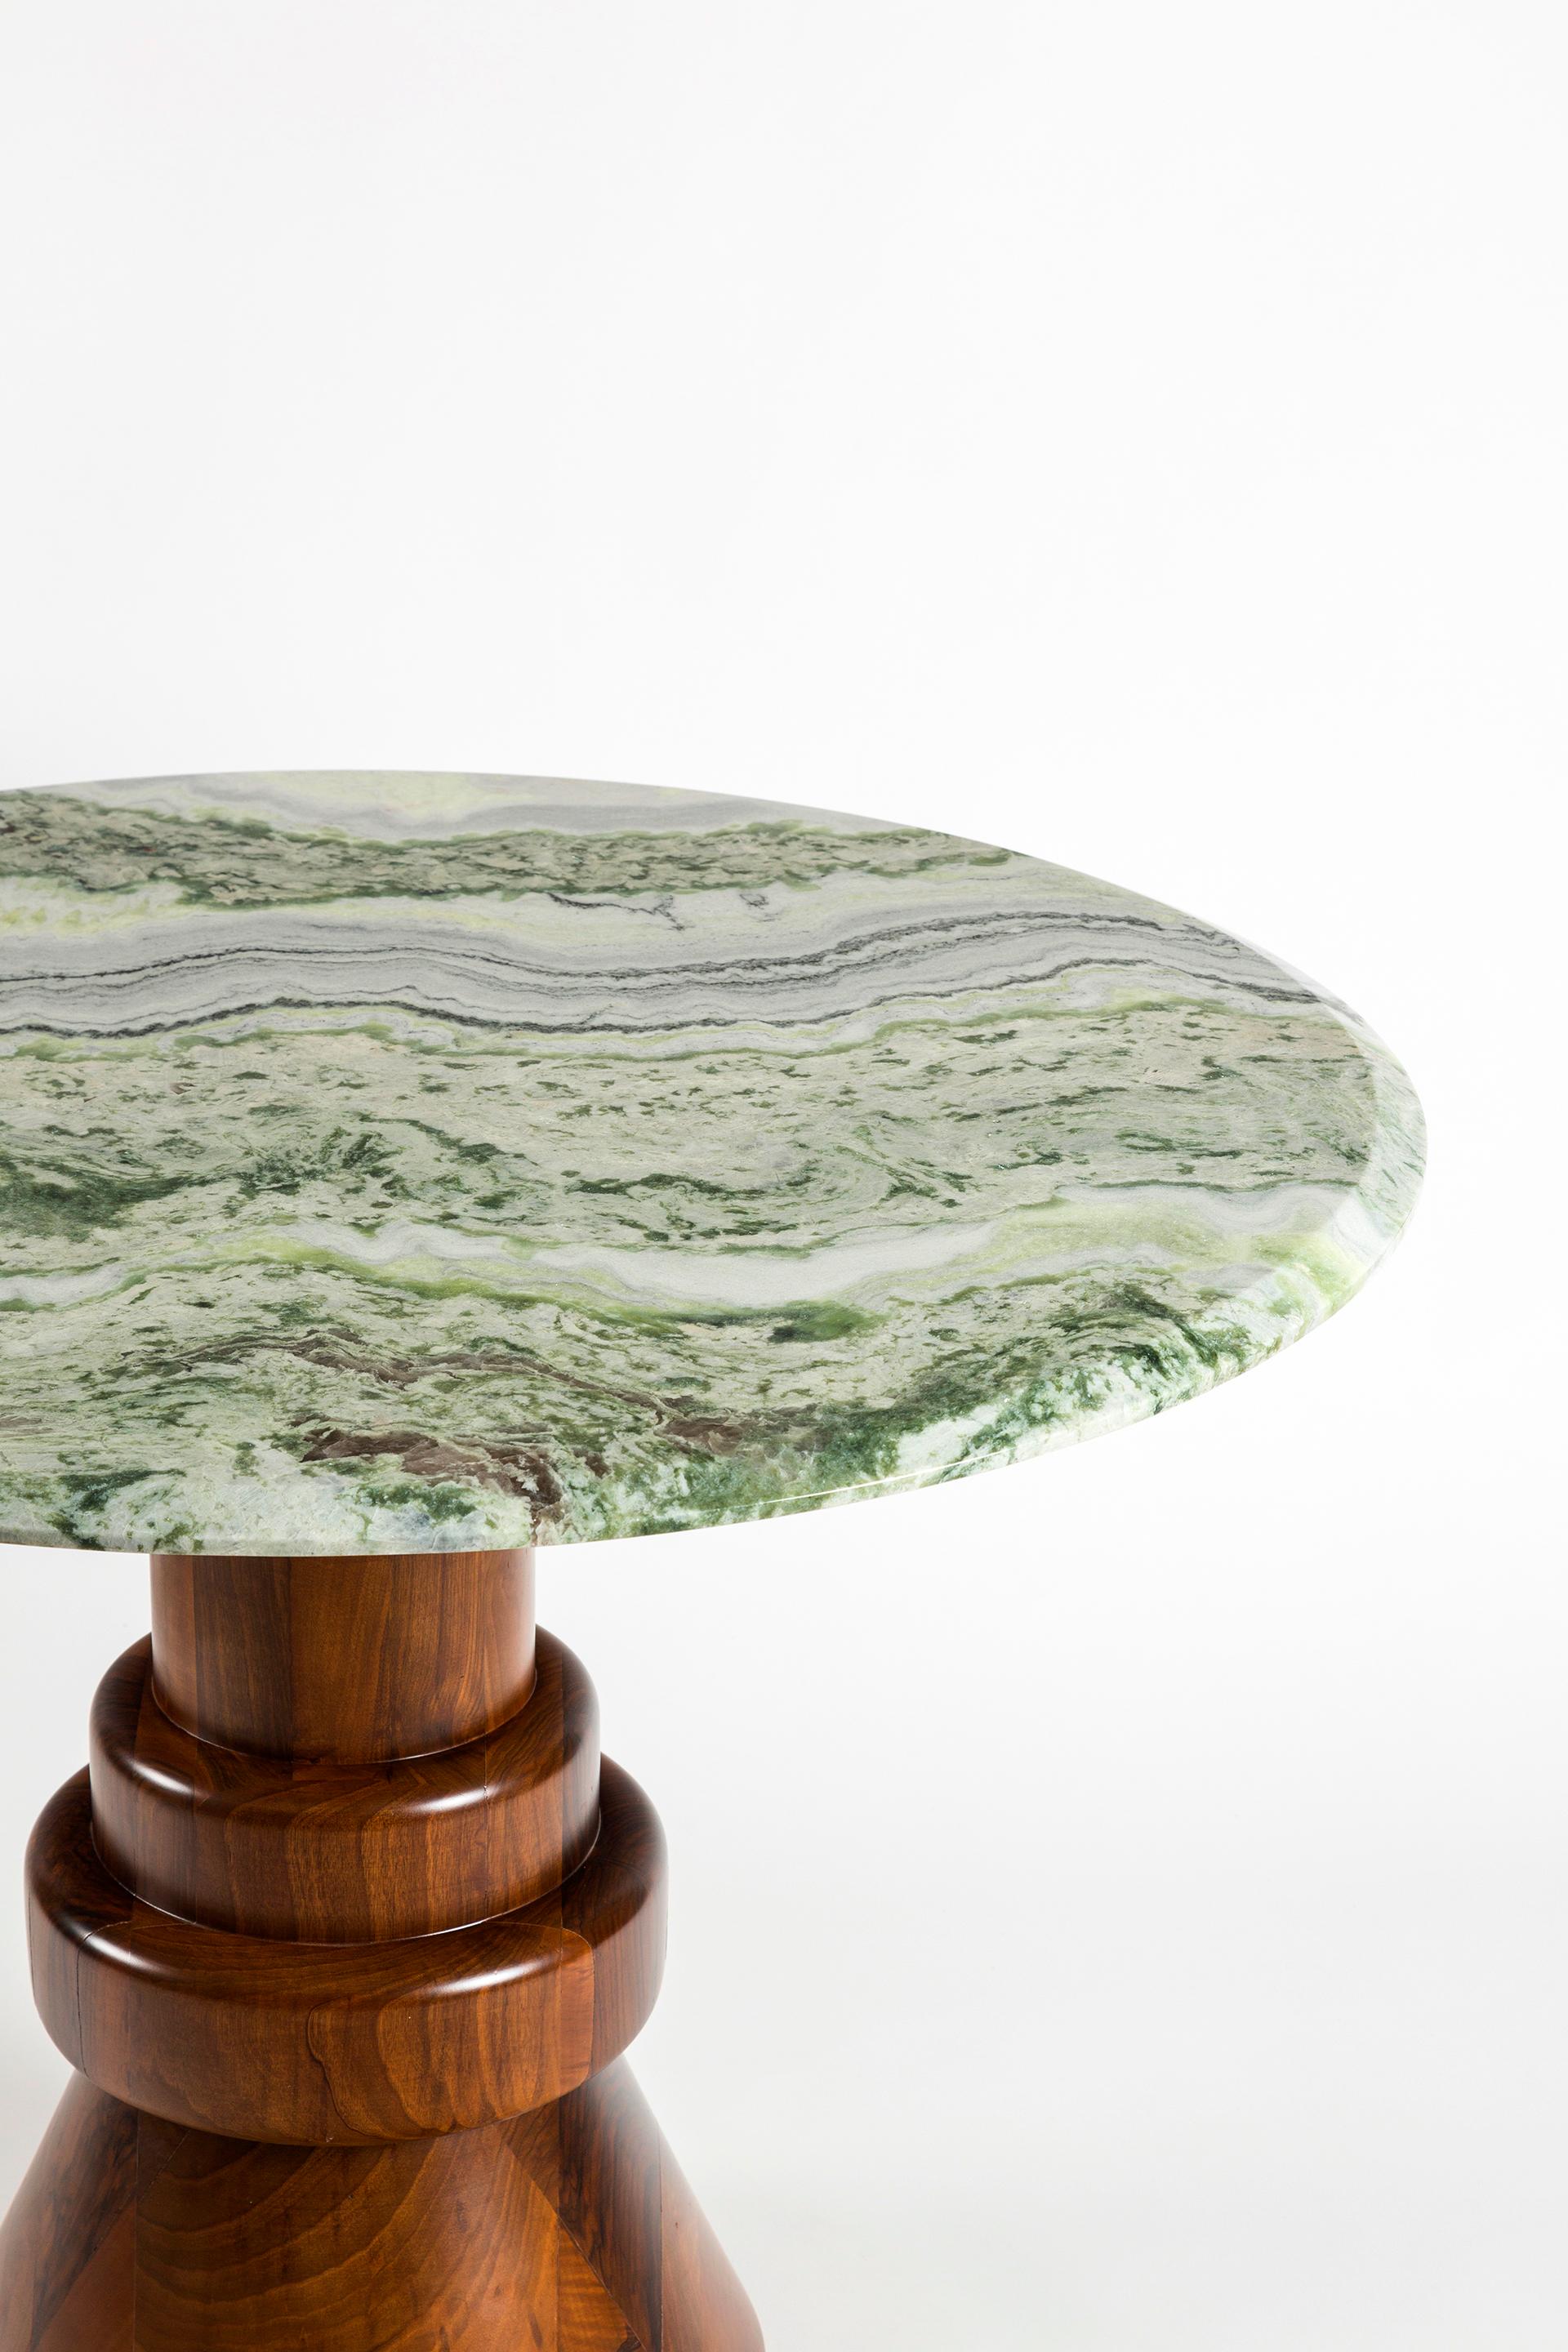 marble and wood table